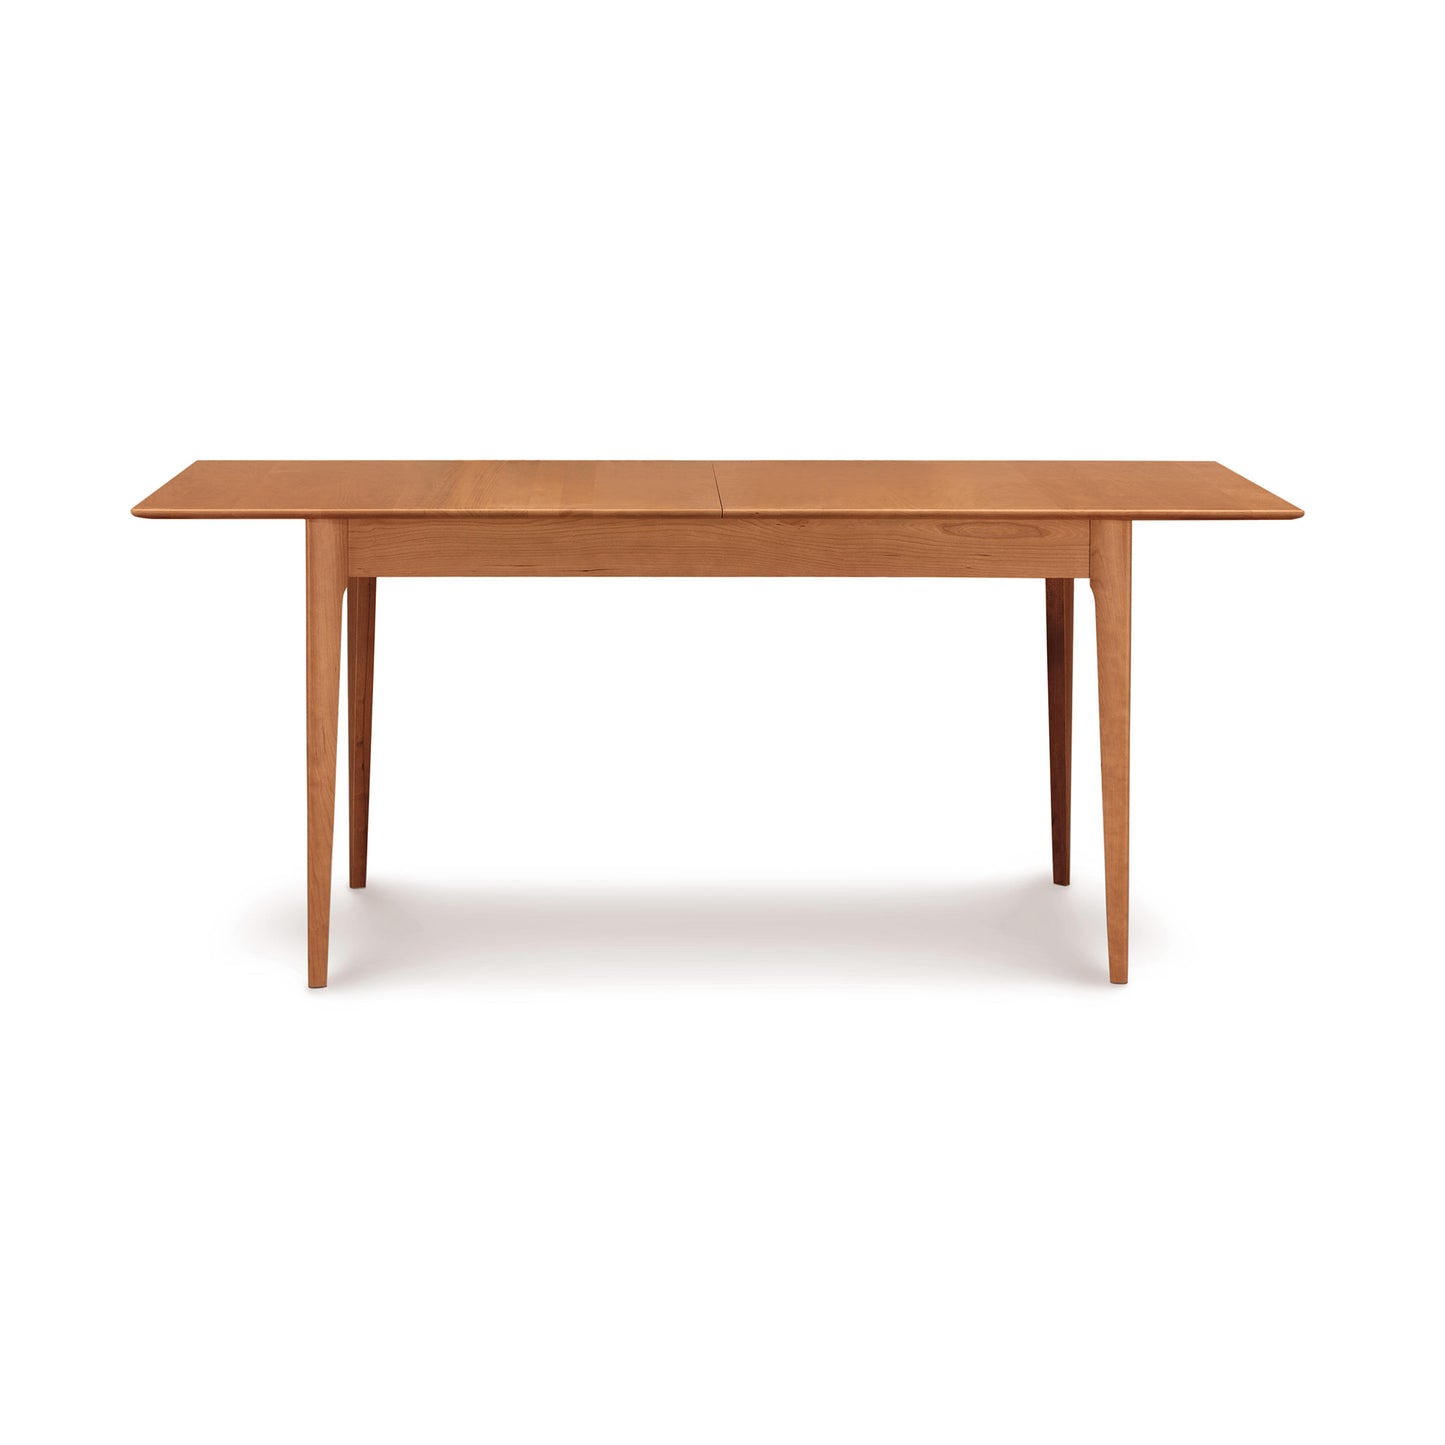 A Sarah Shaker Tapered Leg Extension Table from the Copeland Furniture dining room collection, isolated on a white background.